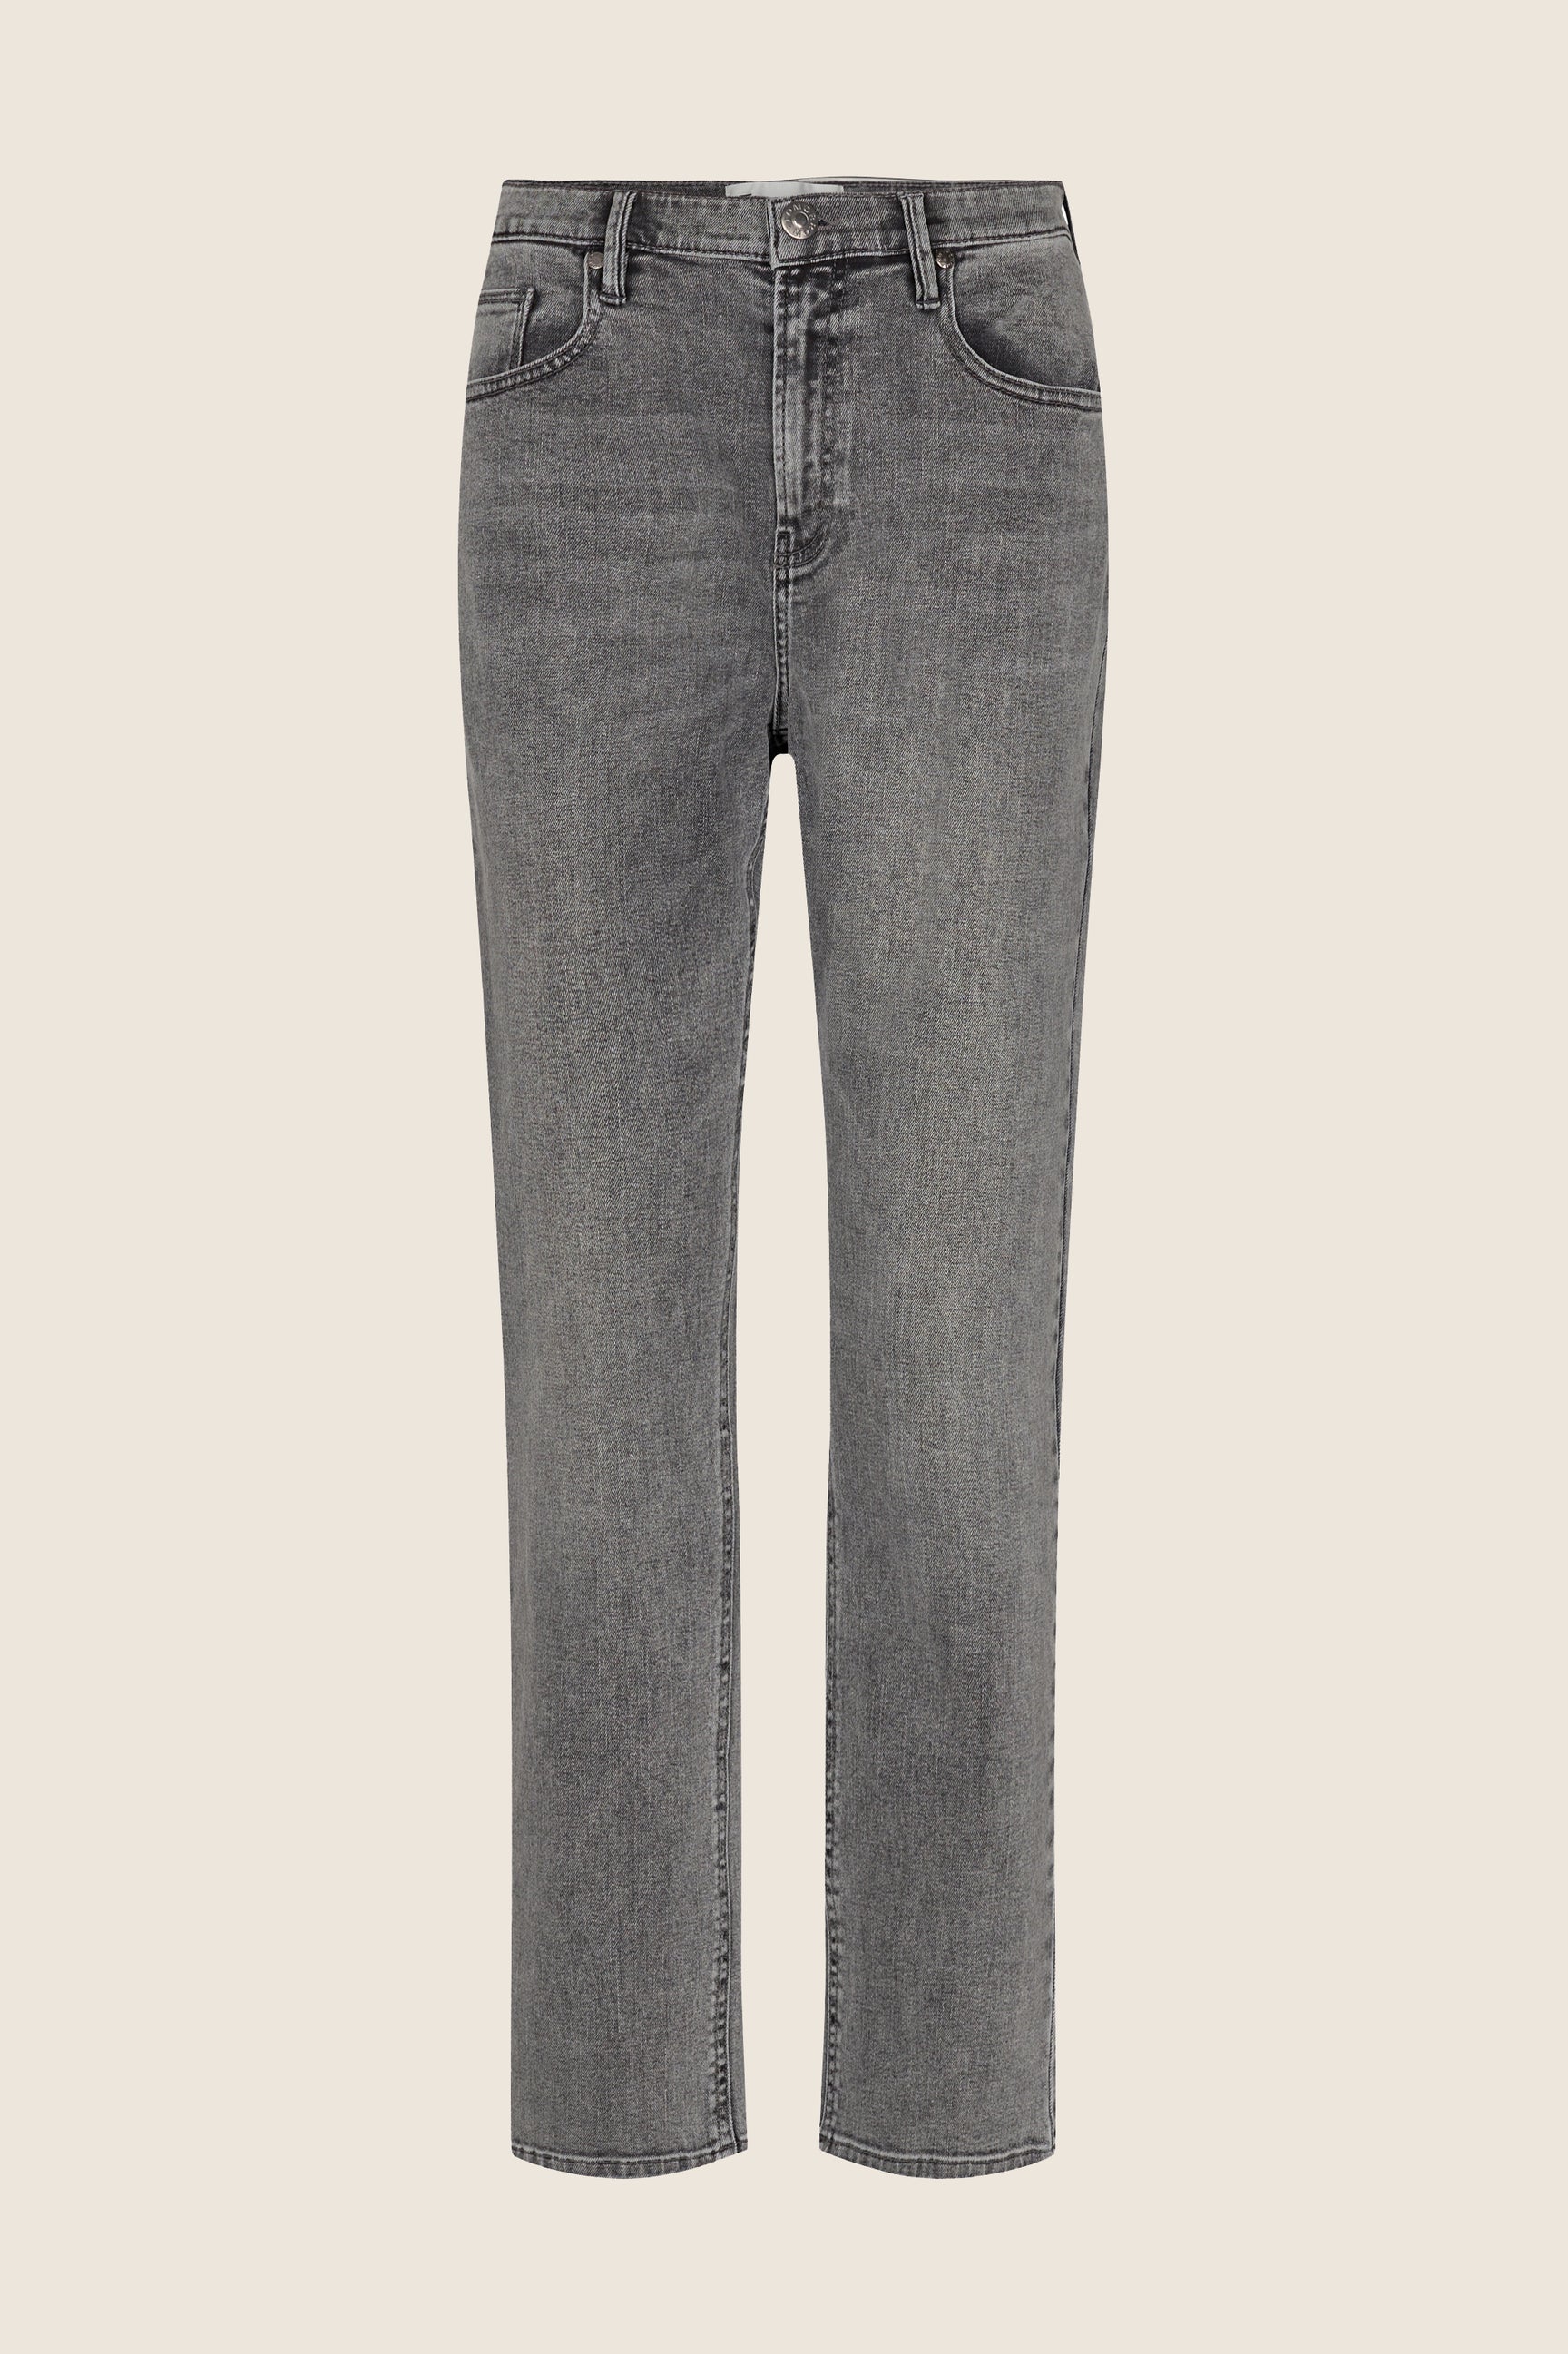 A pair of Teresa Jeans - Vintage Grey Used by Tomorrow Denim, with pockets and buttons, featuring a high waist style.